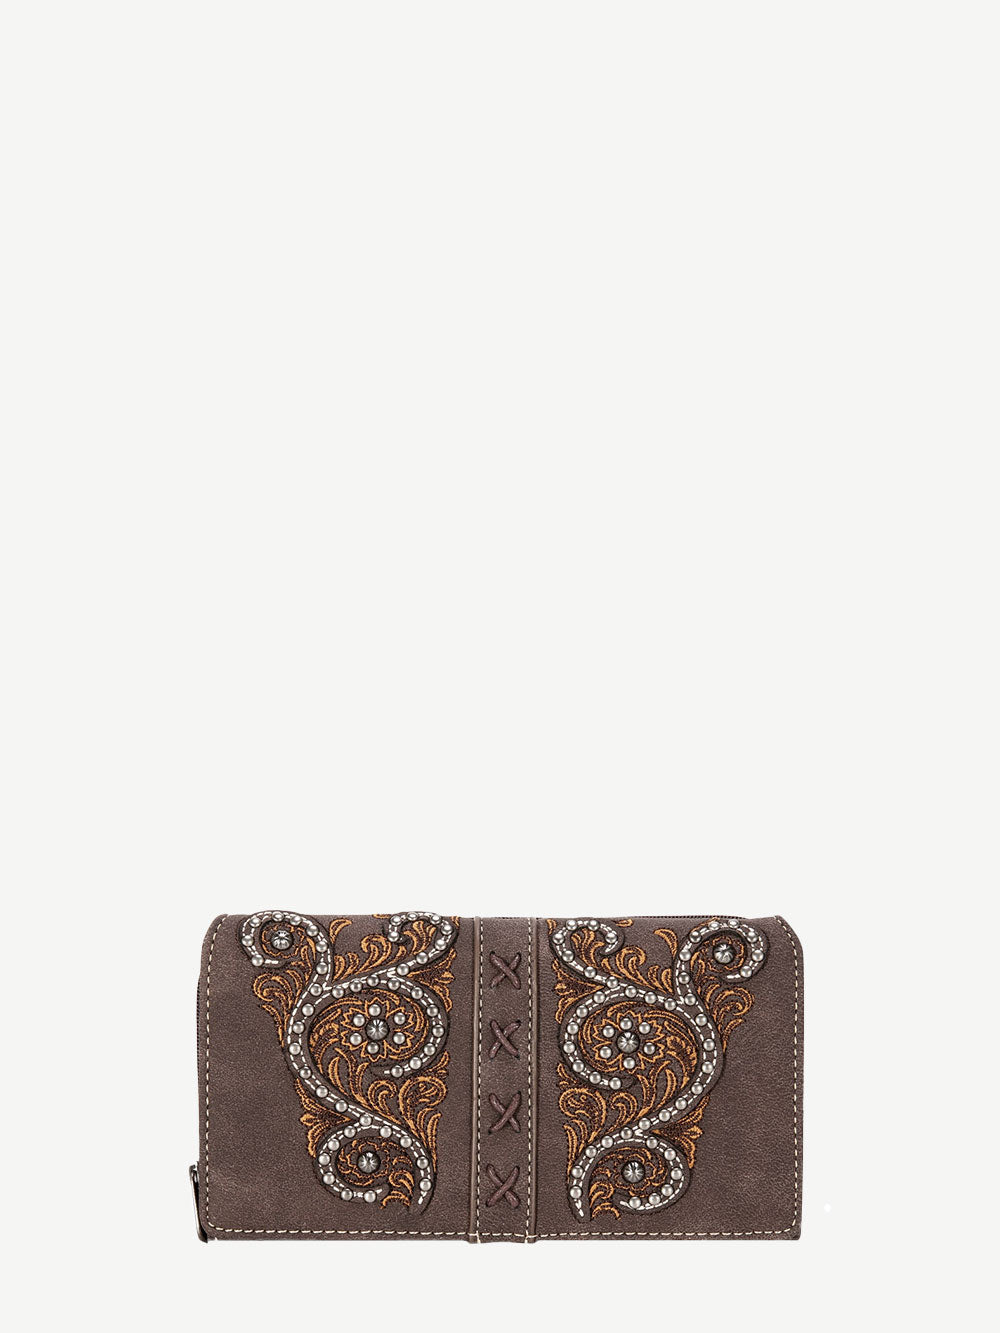 Montana West Floral Embroidered Wallet - Montana West World